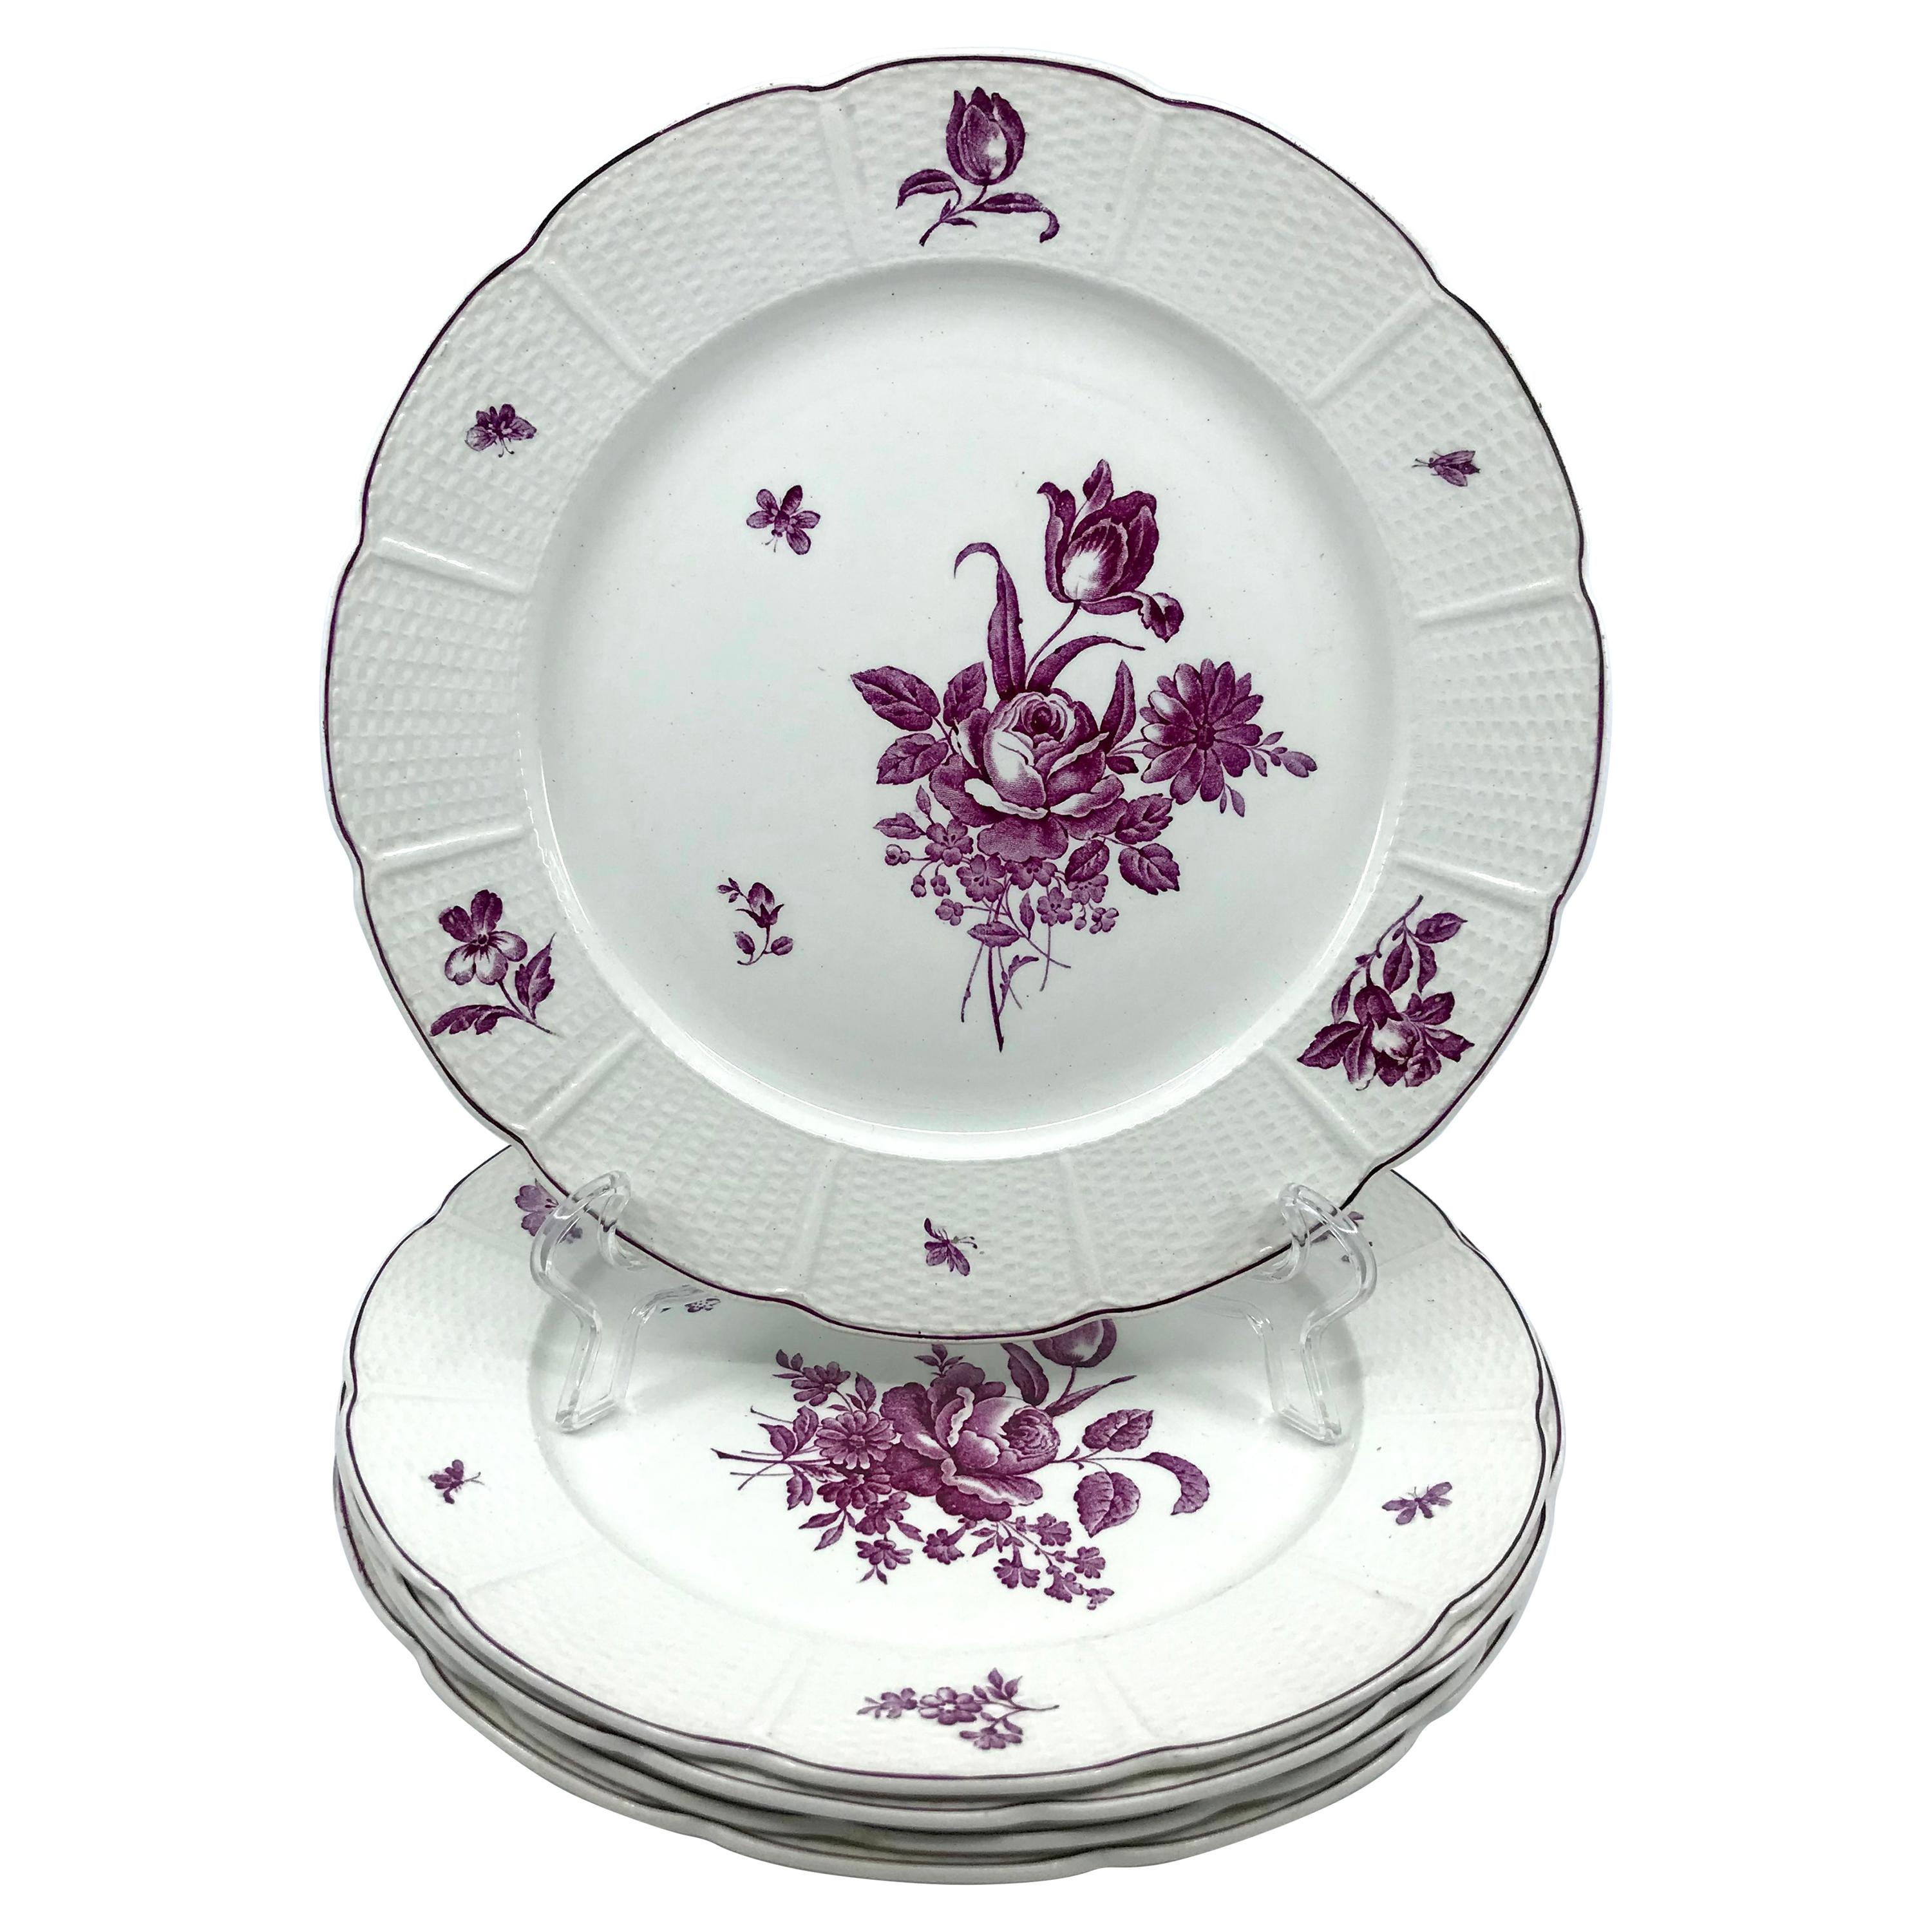 Set_of_Five_Magenta_and_White_Wedgwood_Floral_Plates.jpg